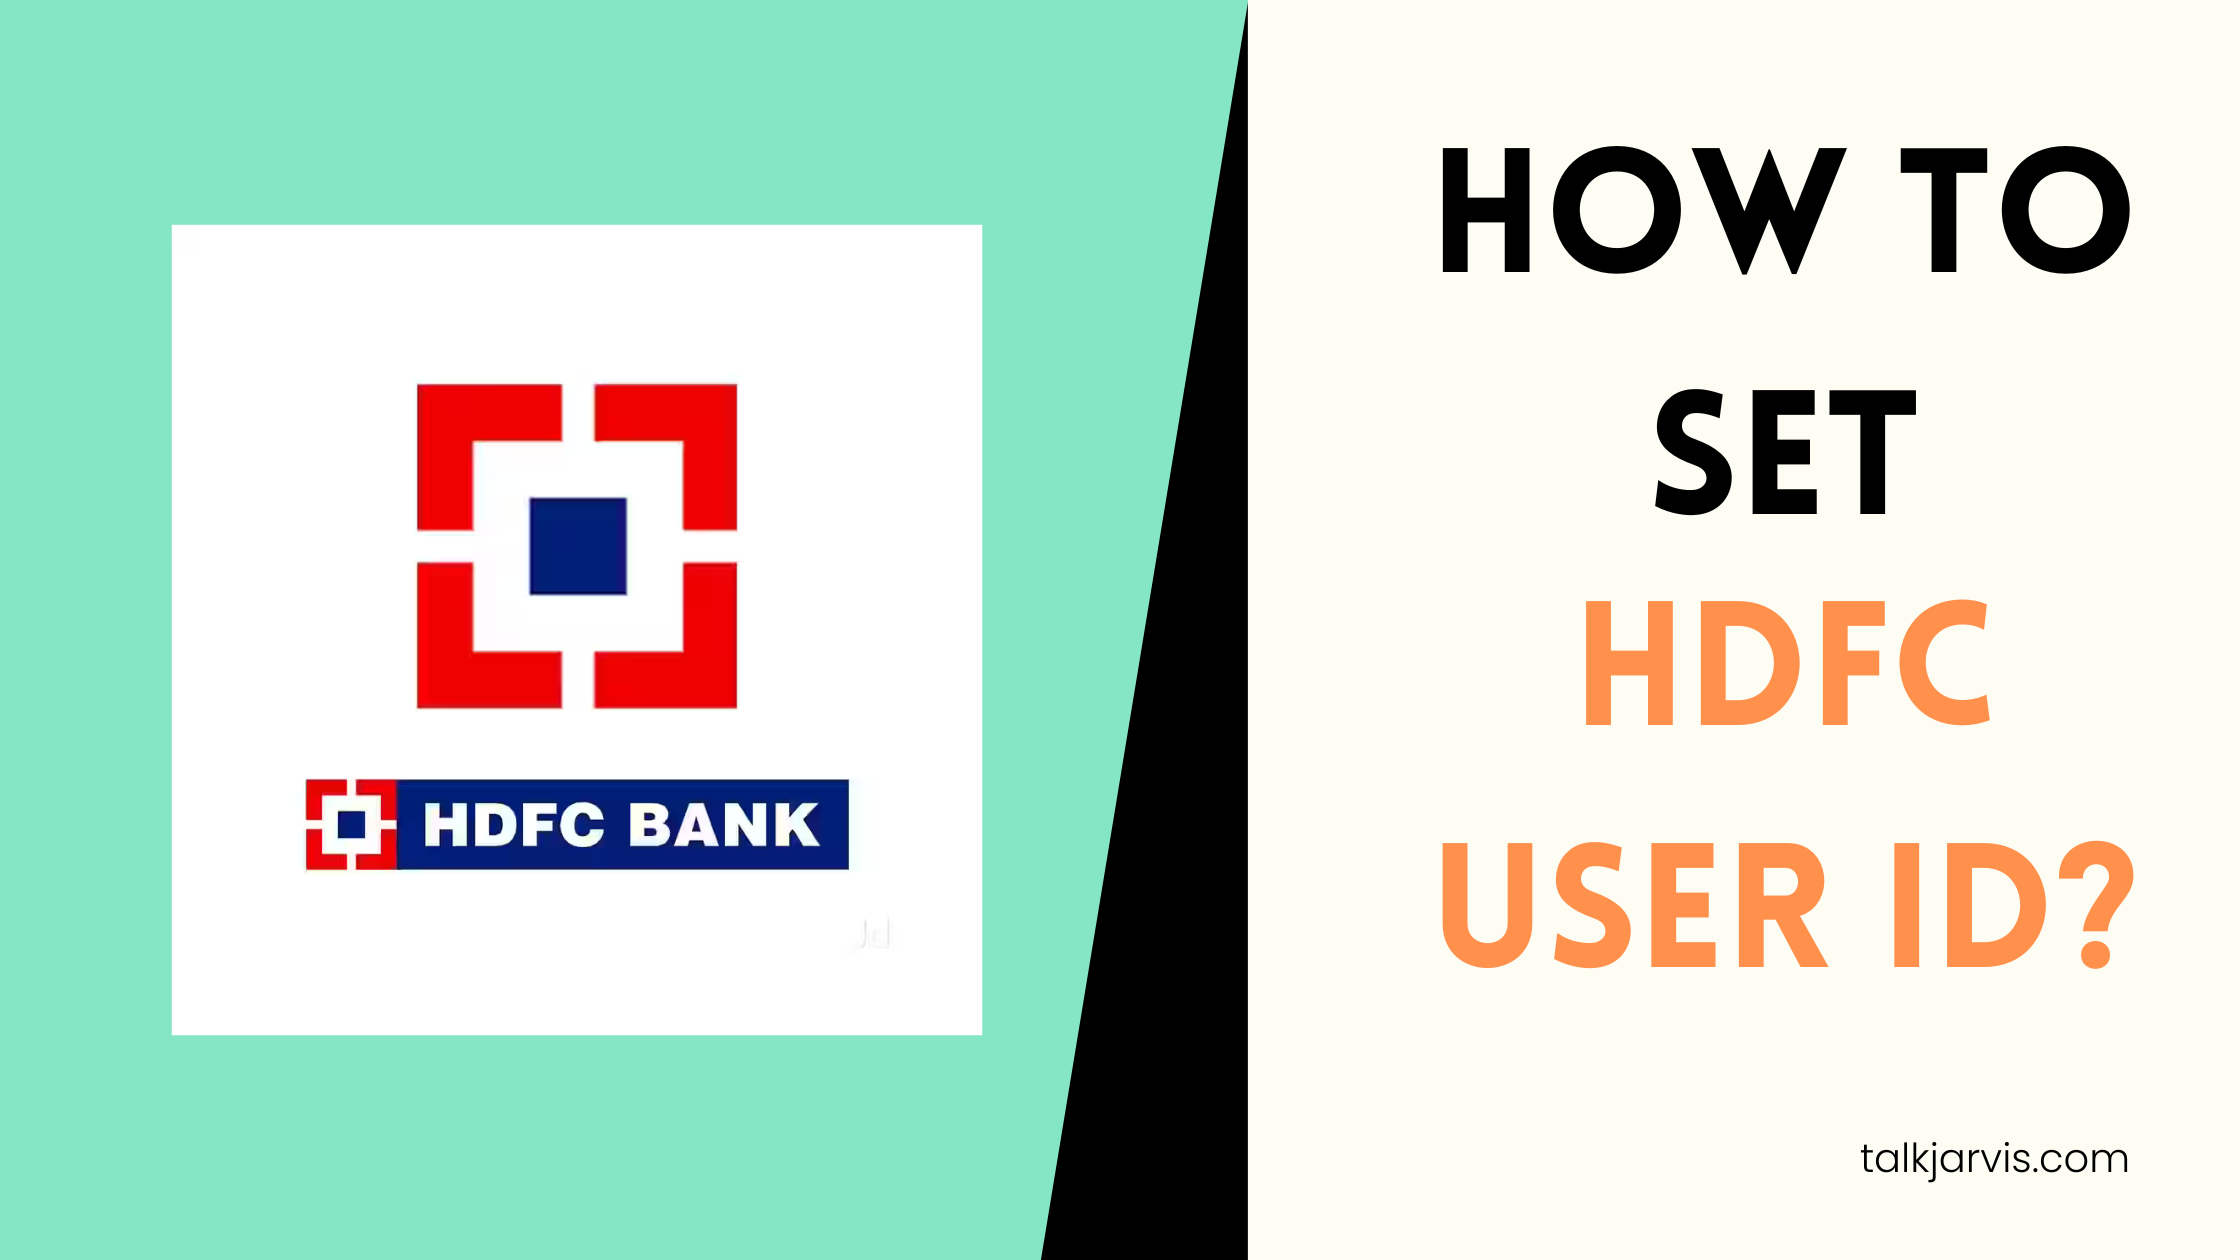 How to Set HDFC User ID